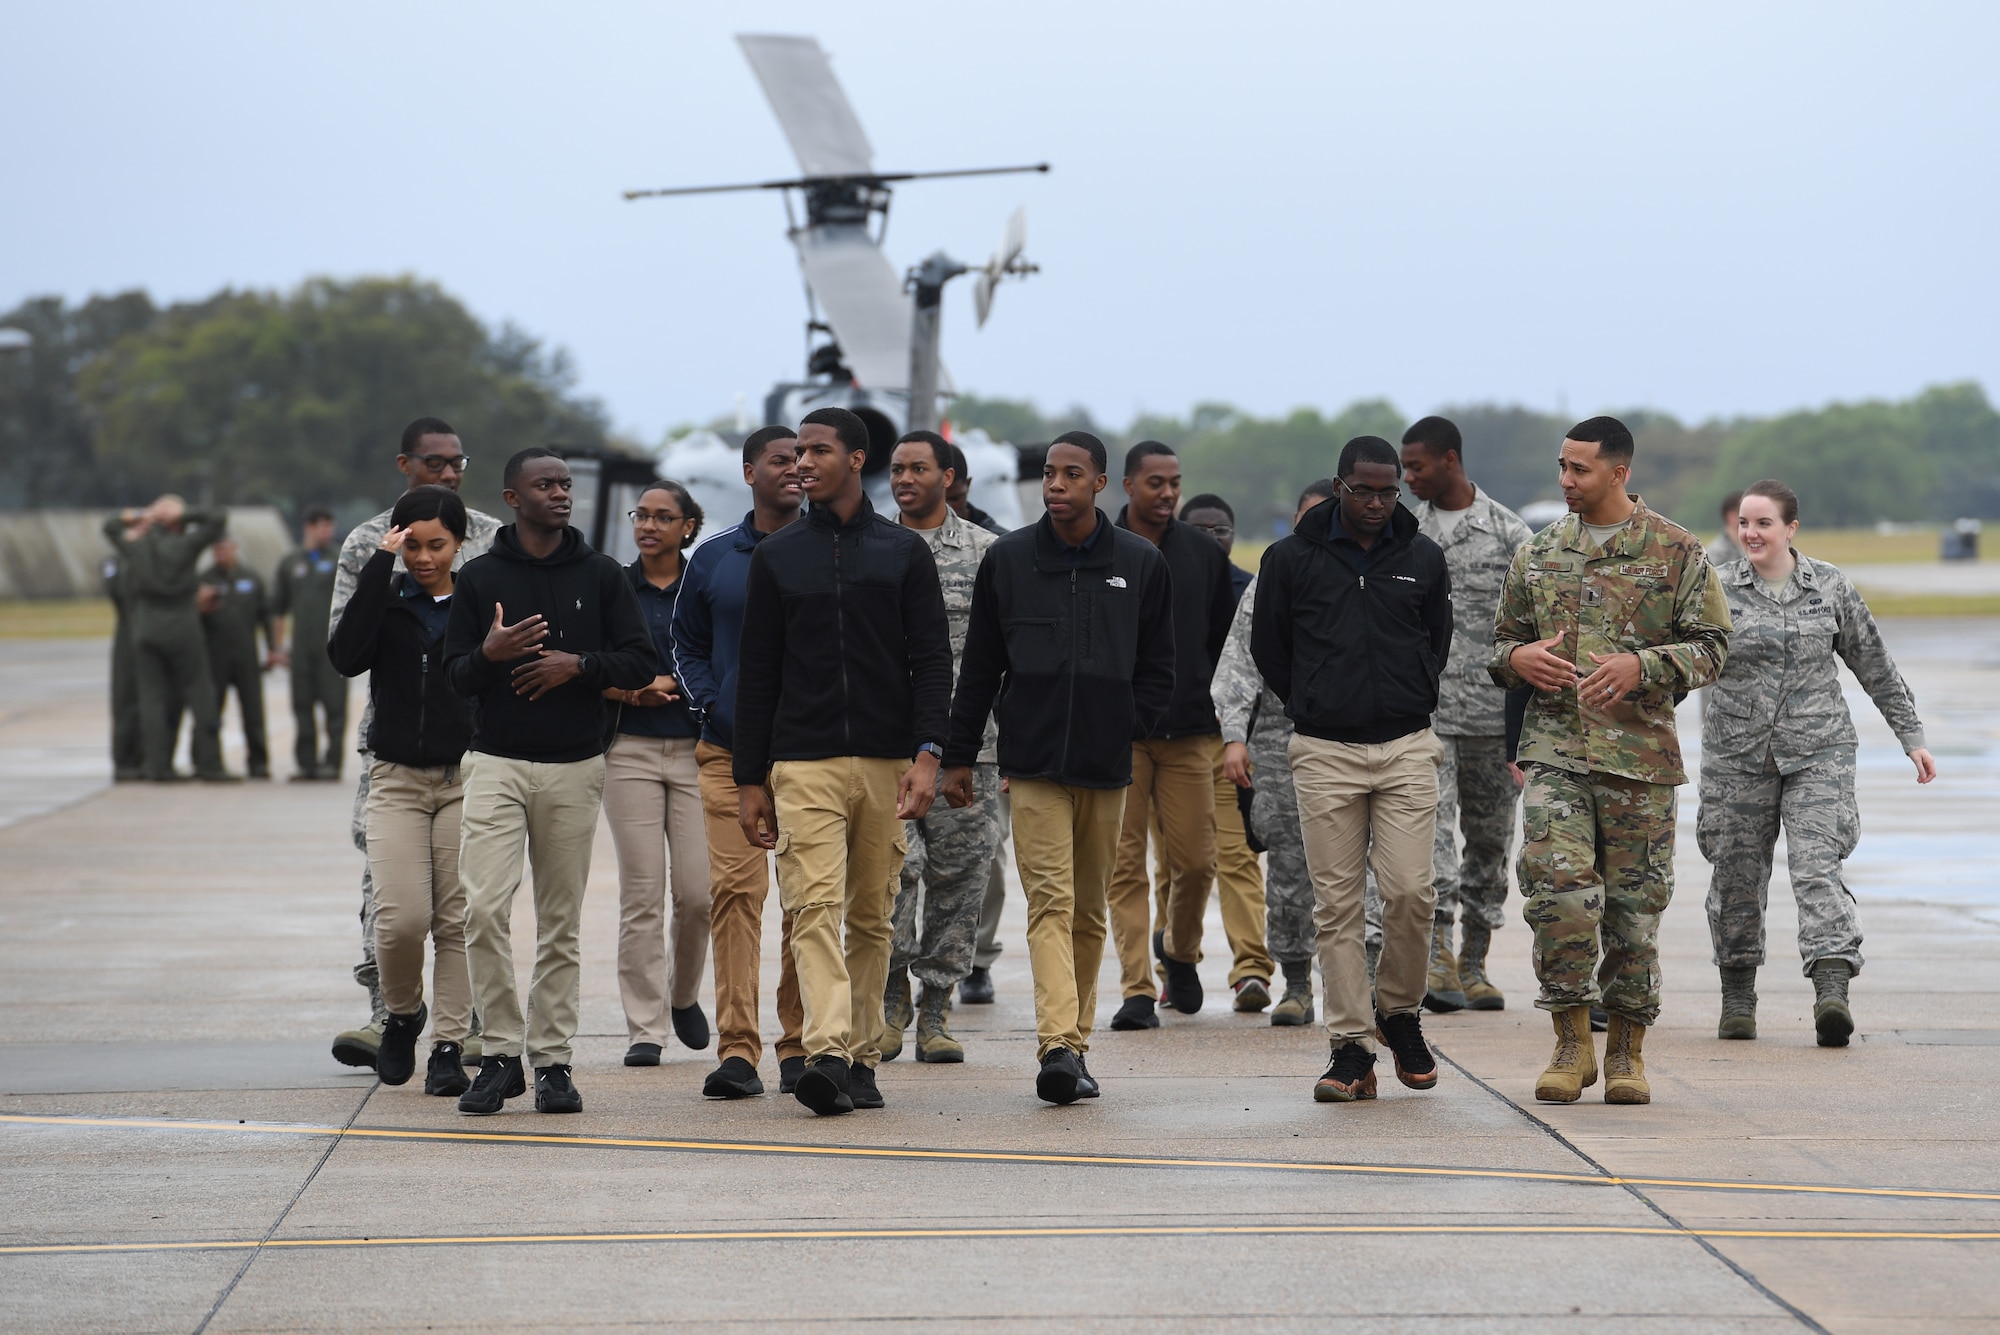 Air Force ROTC cadets walk across the flight line during the fifth annual Pathways to Blue on Keesler Air Force Base, Mississippi, April 5, 2019. Pathways to Blue is a diversity outreach event hosted by Second Air Force with the support of the 81st Training Wing and the 403rd Wing. More than 250 cadets from 12 different colleges and universities were provided hands-on demonstrations of various career fields. (U.S. Air Force photo by Kemberly Groue)